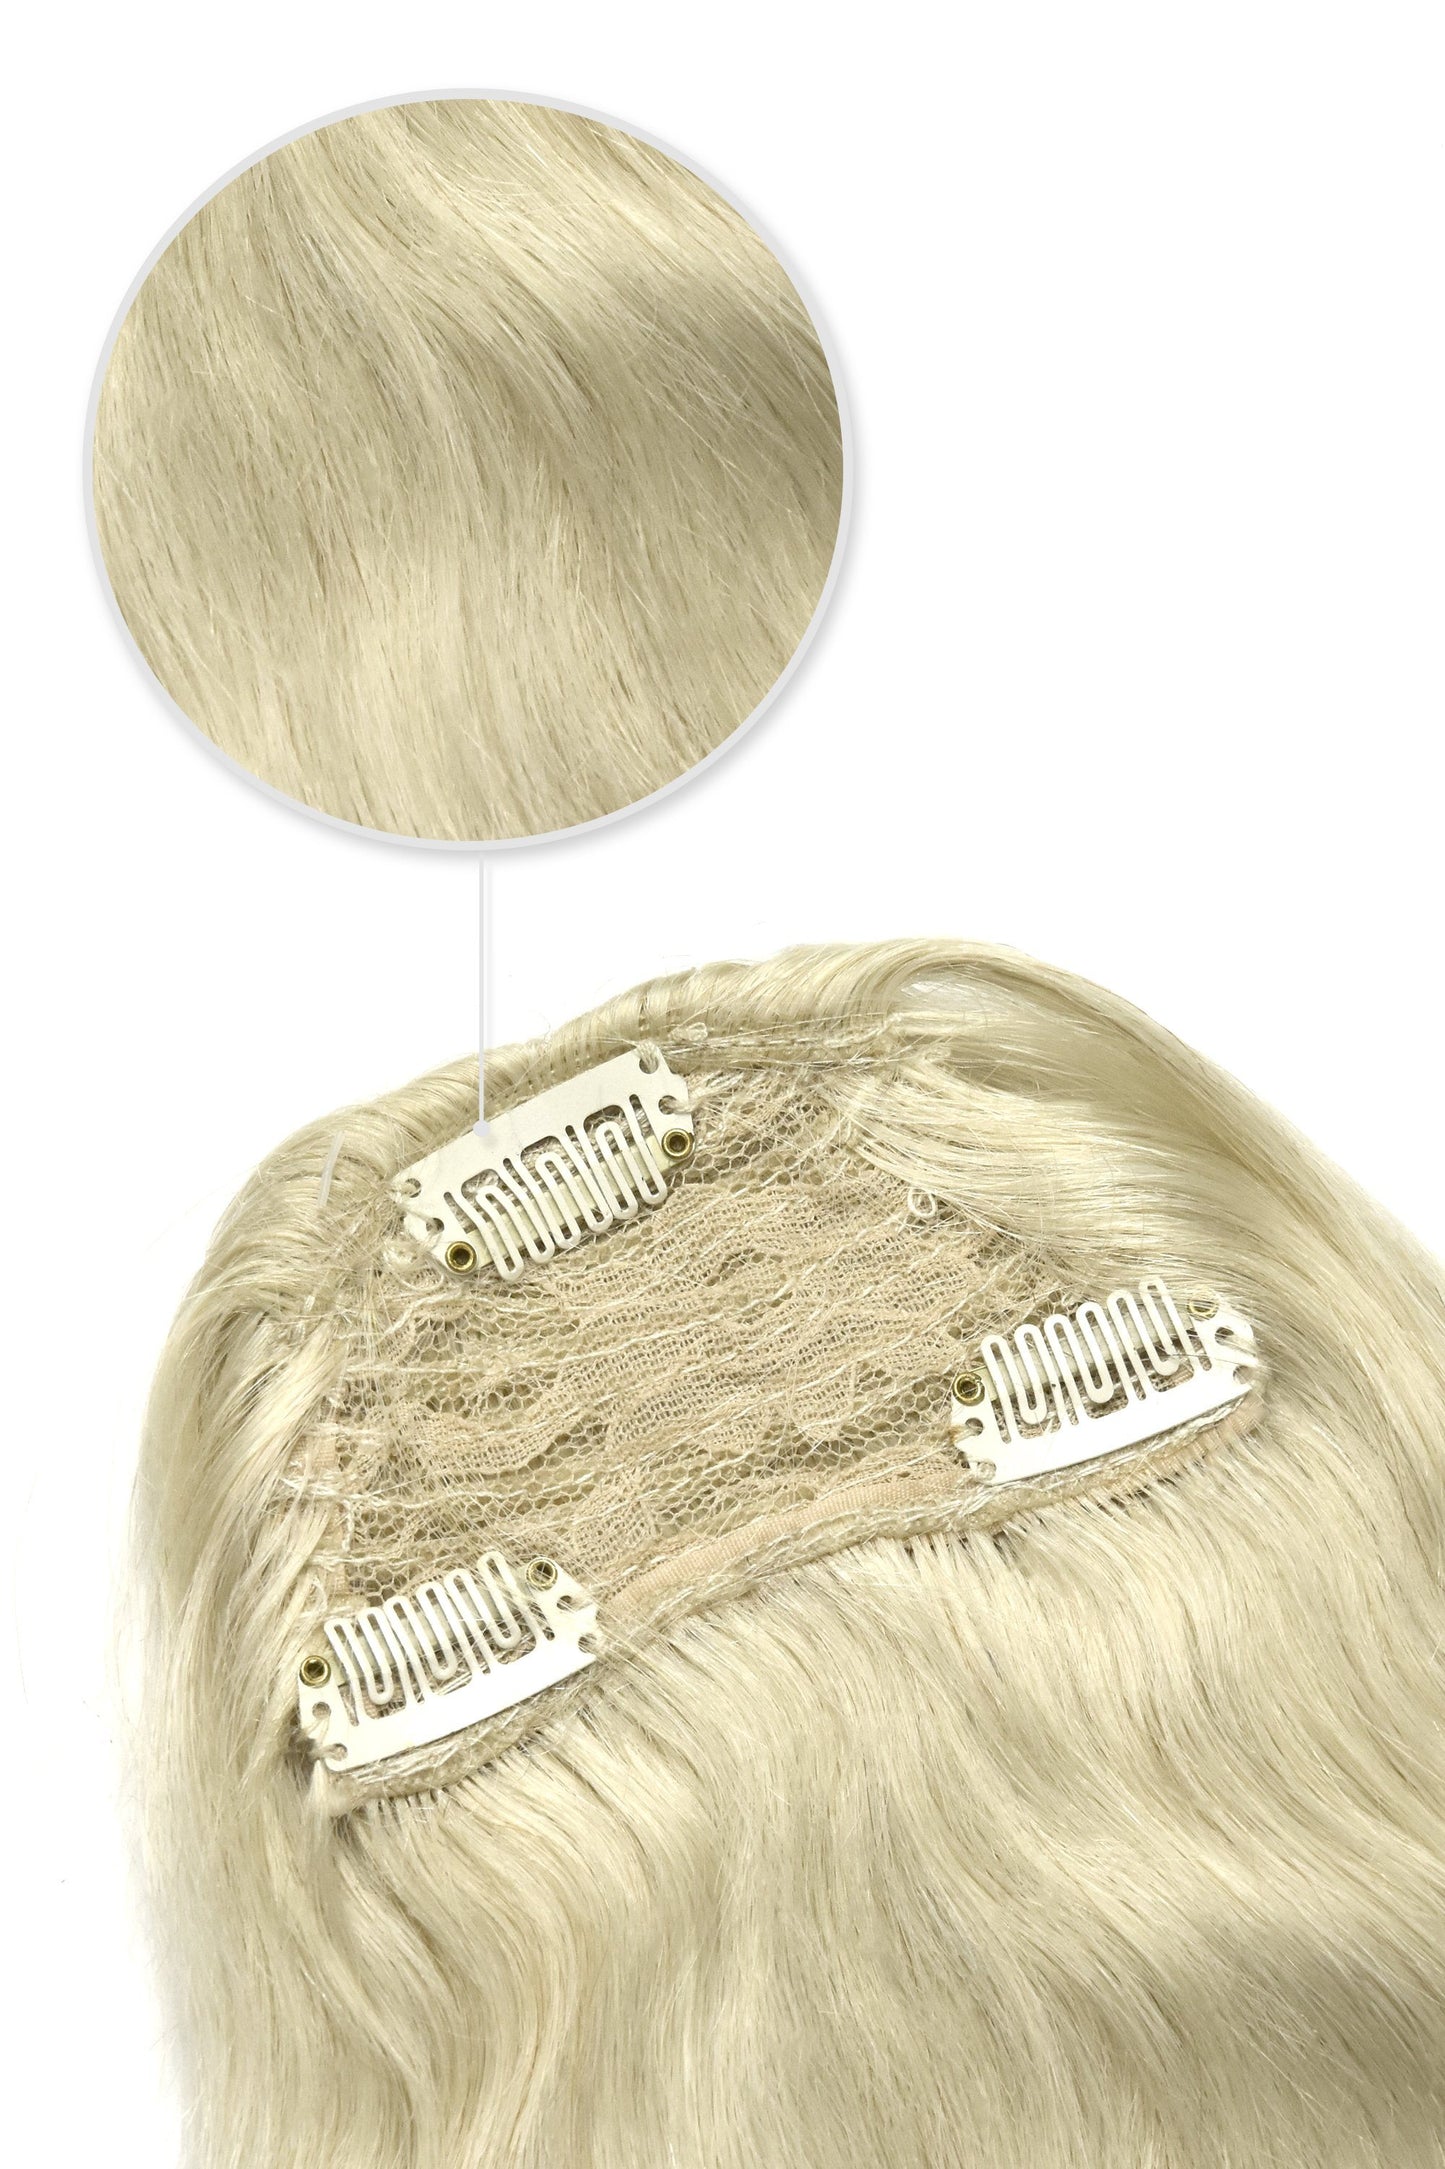 Clip in /on Remy Human Hair Fringe / Bangs - ICEBLONDE Clip In Fringe Extensions cliphair 